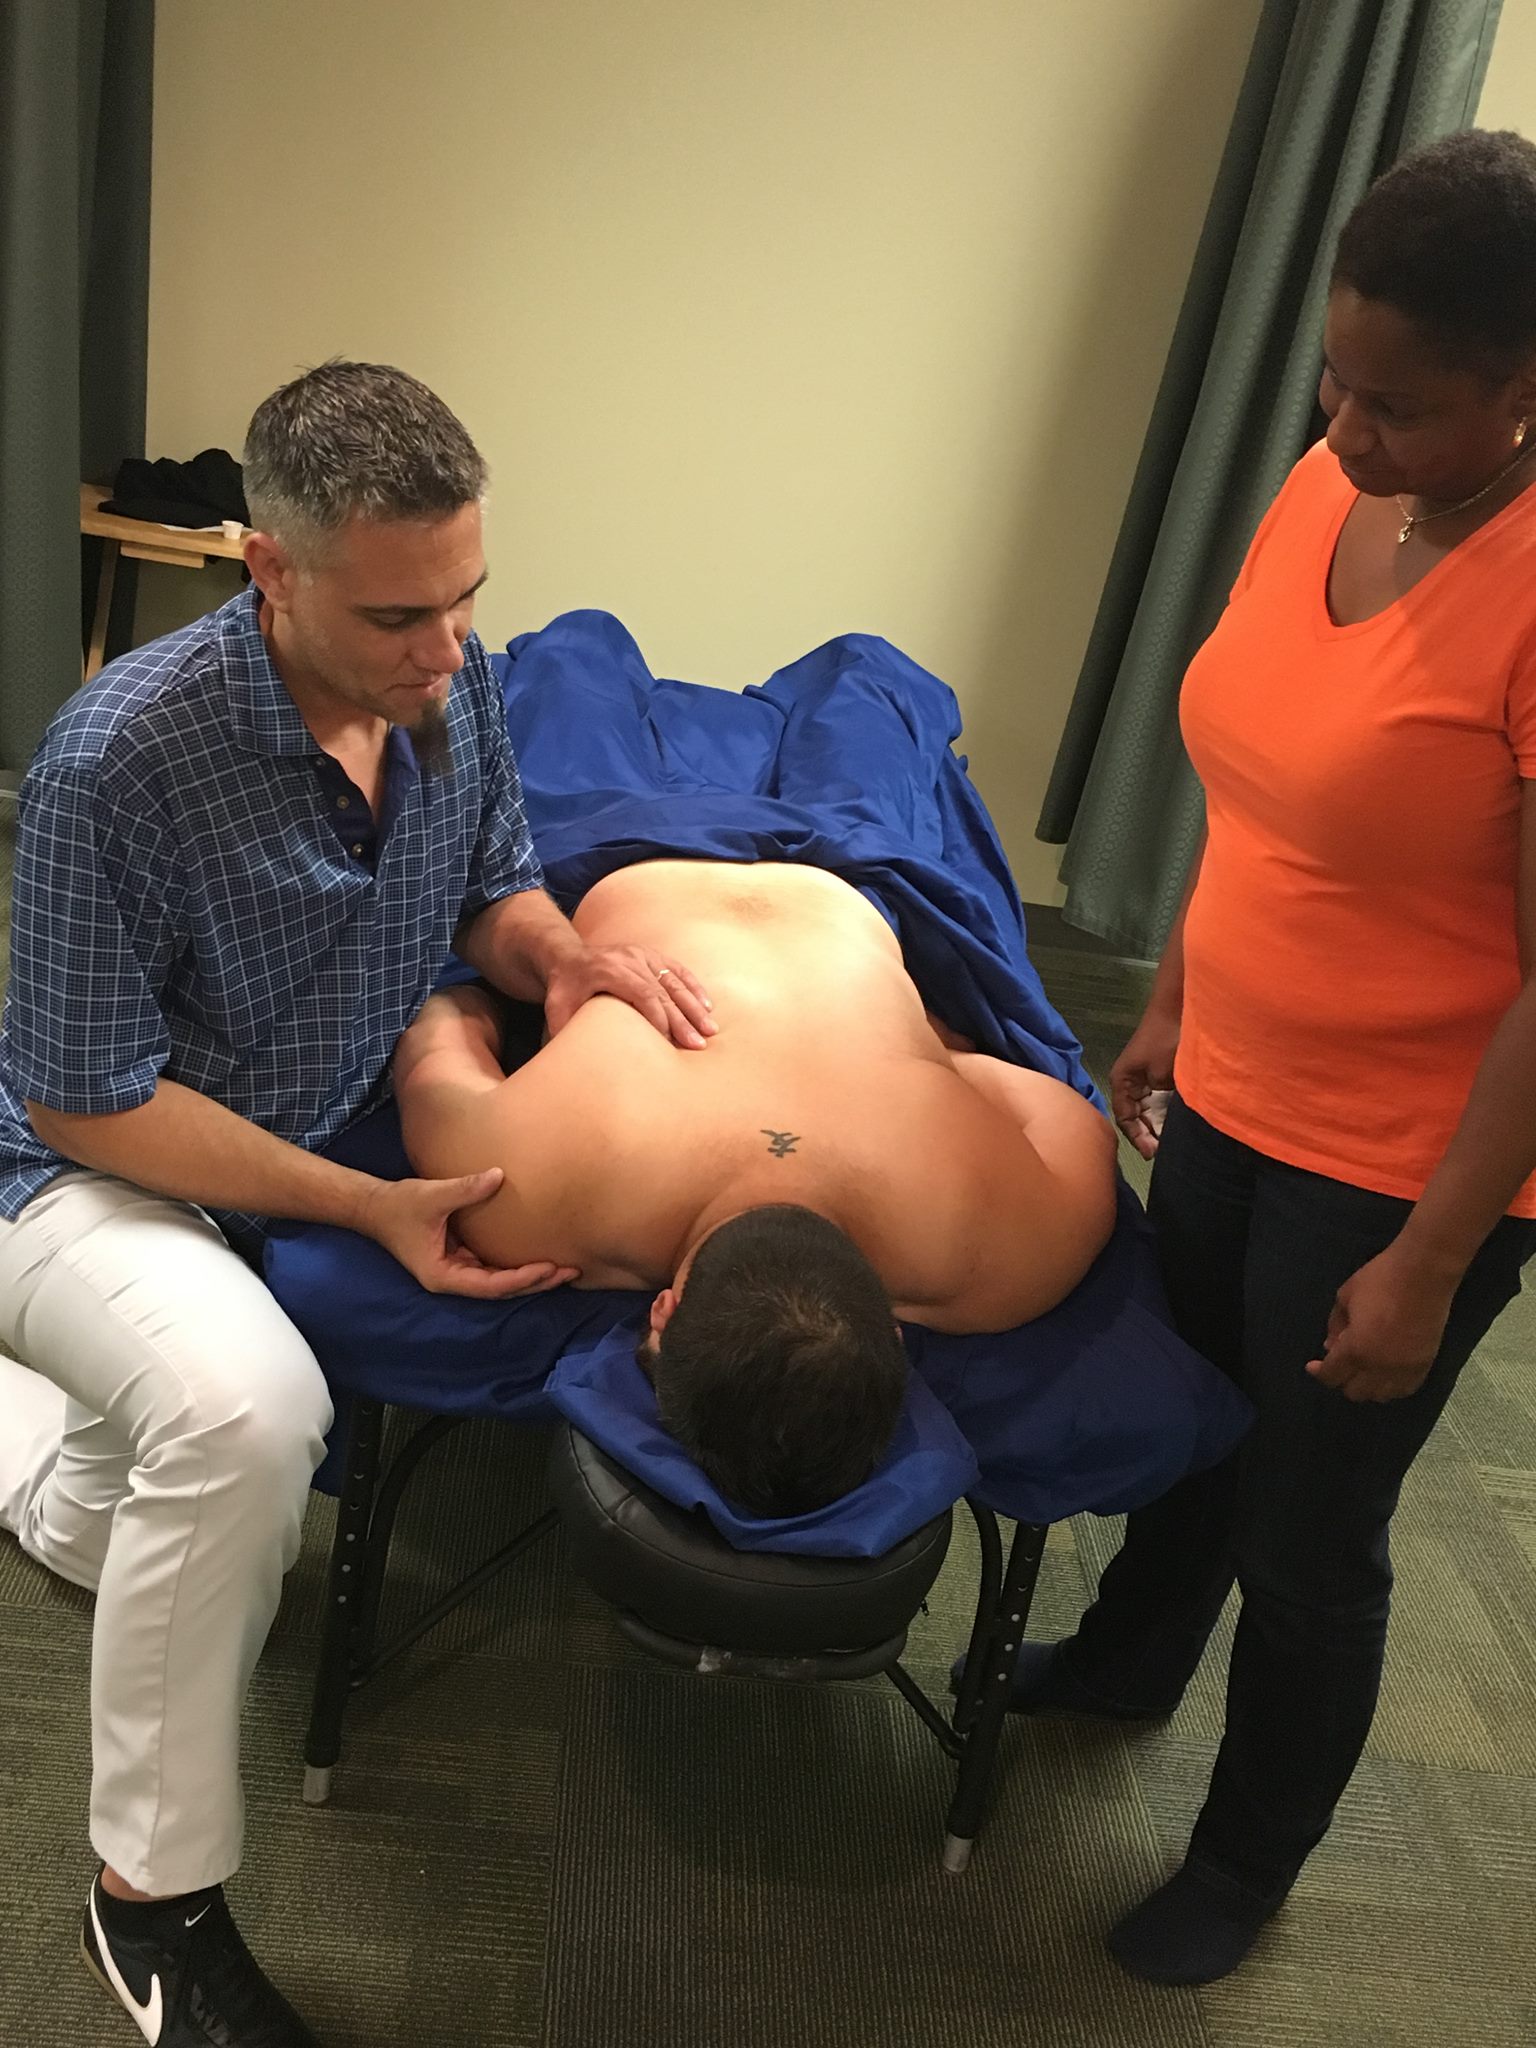 Sean demonstrating shoulder work at our medical massage therapy school - floridasab